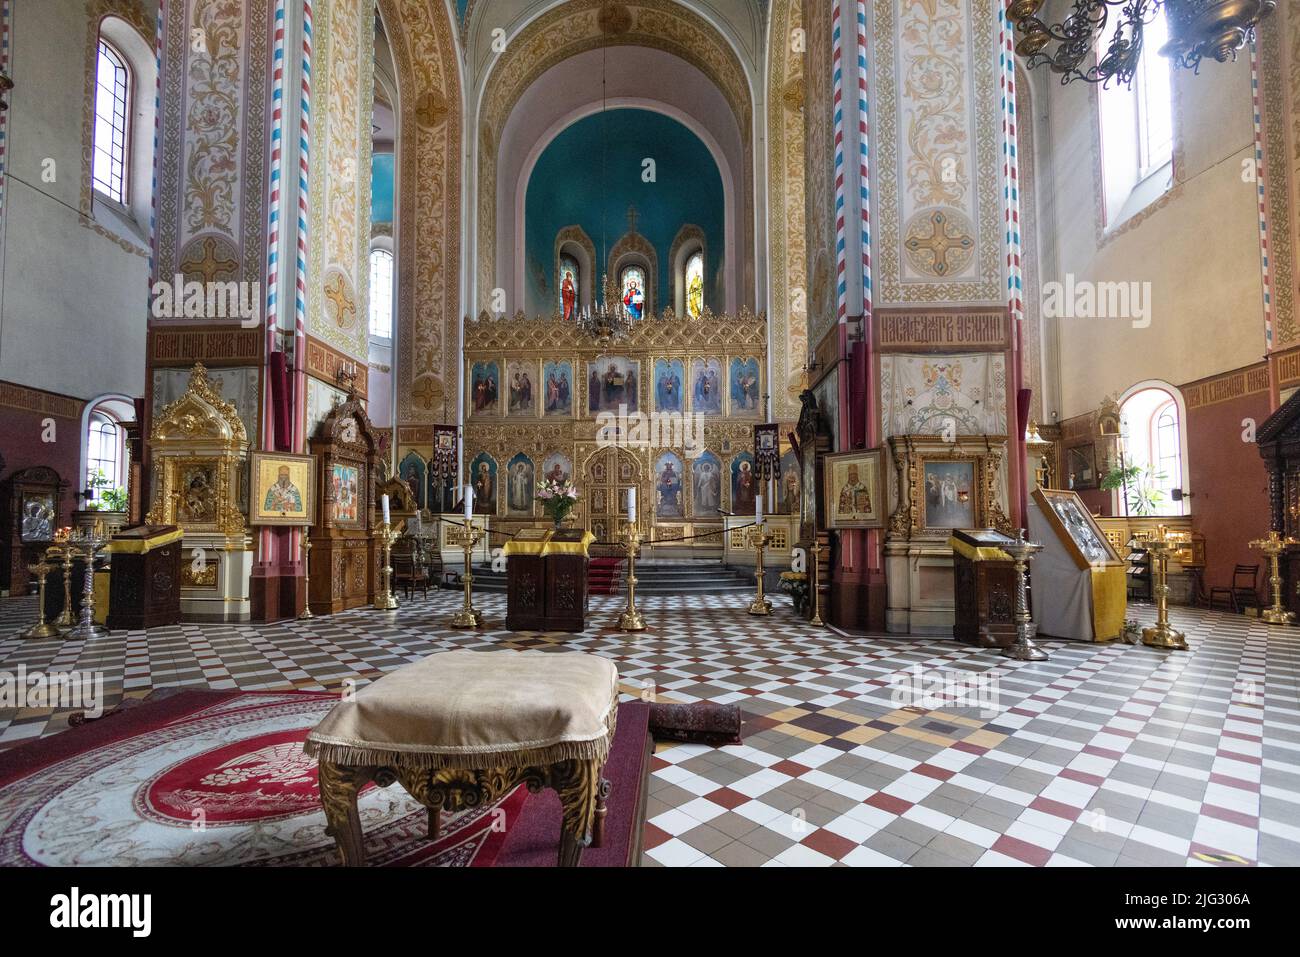 Inside the ornate interior of the 19th century Alexander Nevsky cathedral,  the orthodox church in Tallinn, Estonia Europe Stock Photo